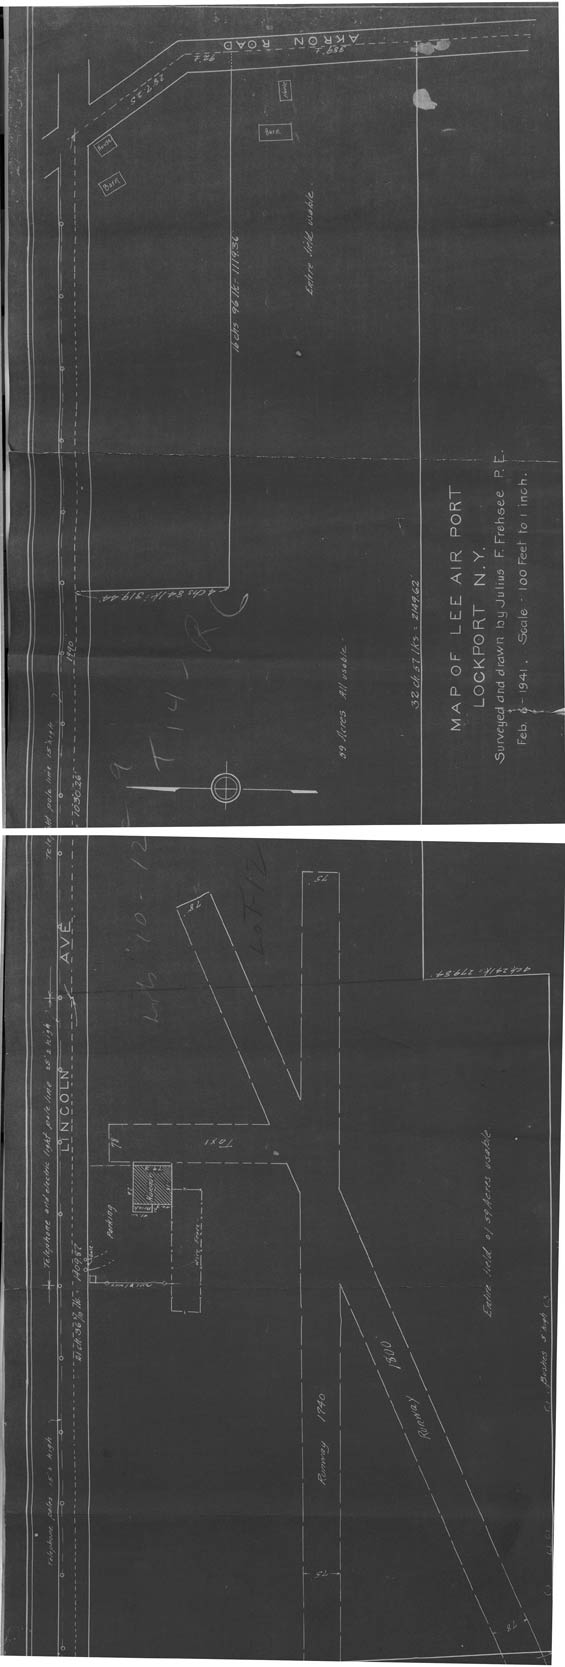 Engineering Drawing, Lee Airport, February 6, 1941 (Source: Cameron)